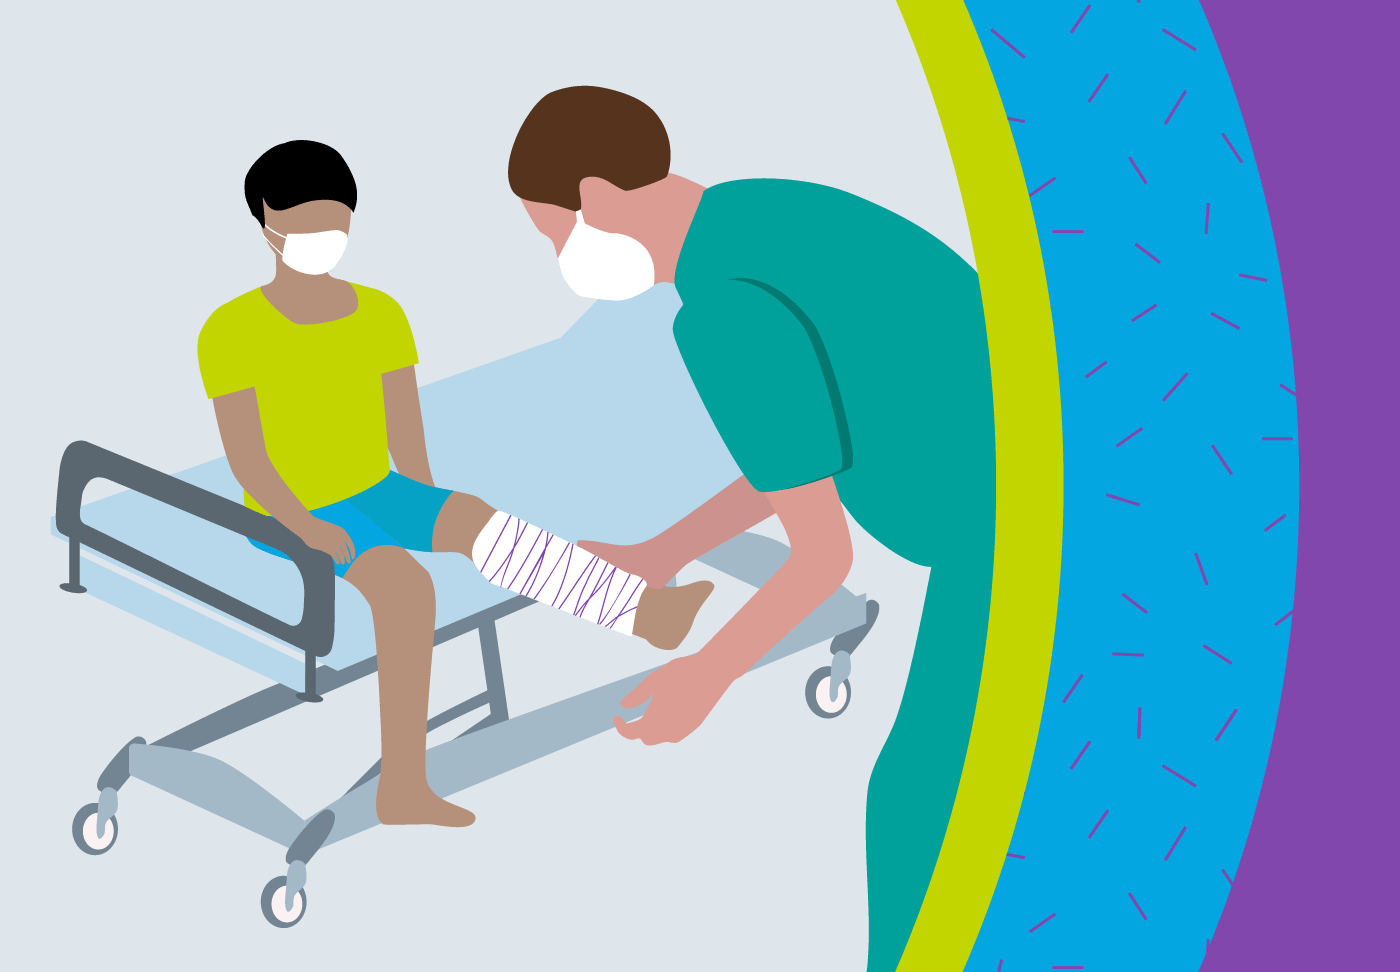 Child with a broken leg being cared for by a pediatric specialist.